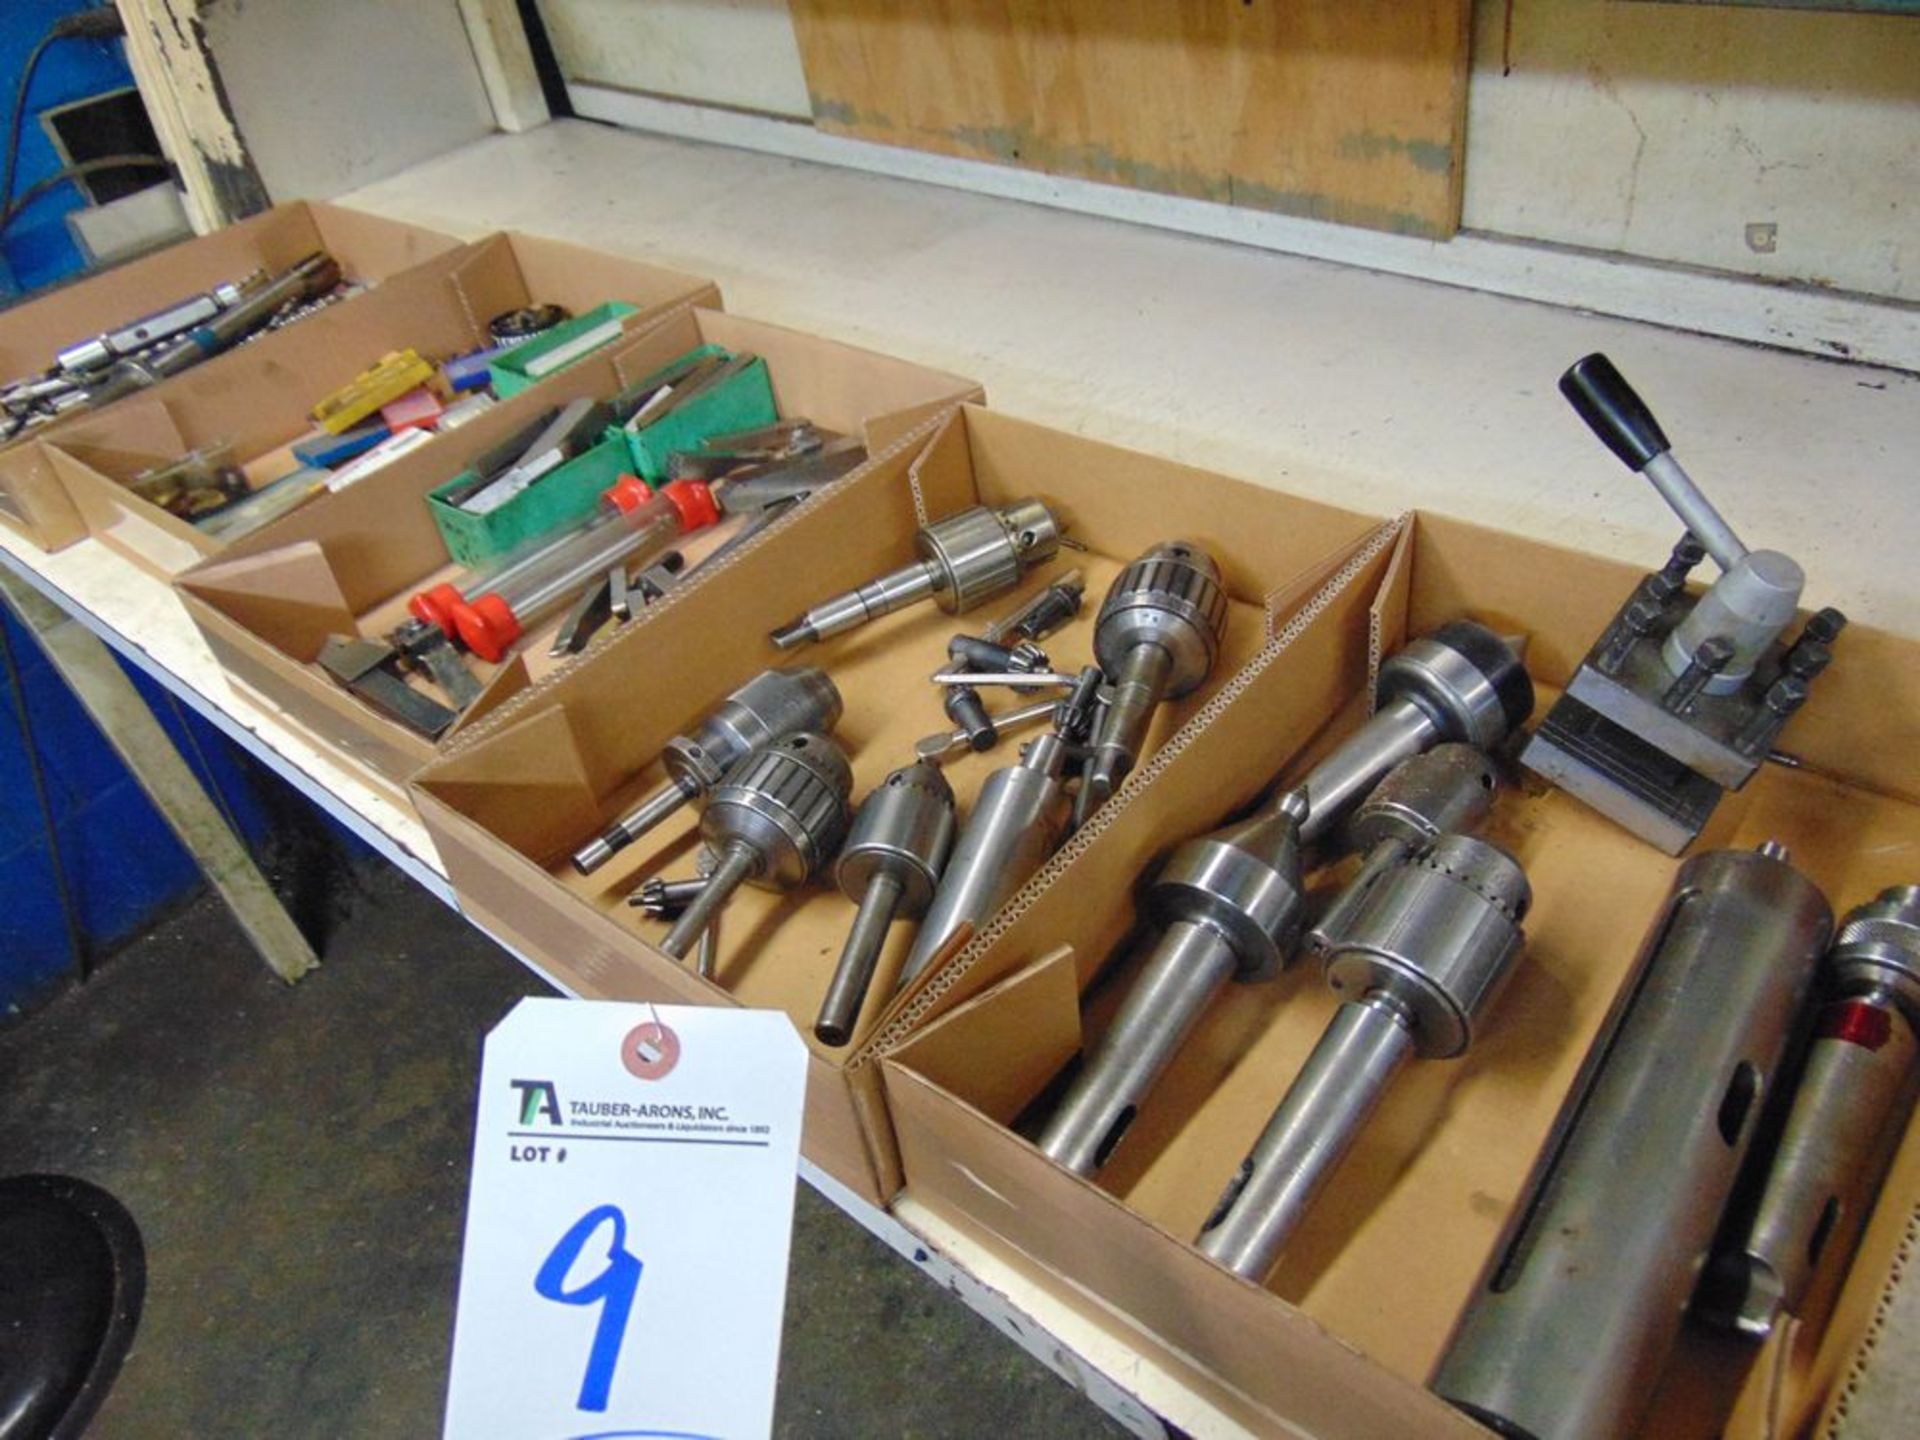 (Lot) Assorted Lathe Tooling (5 Boxes)